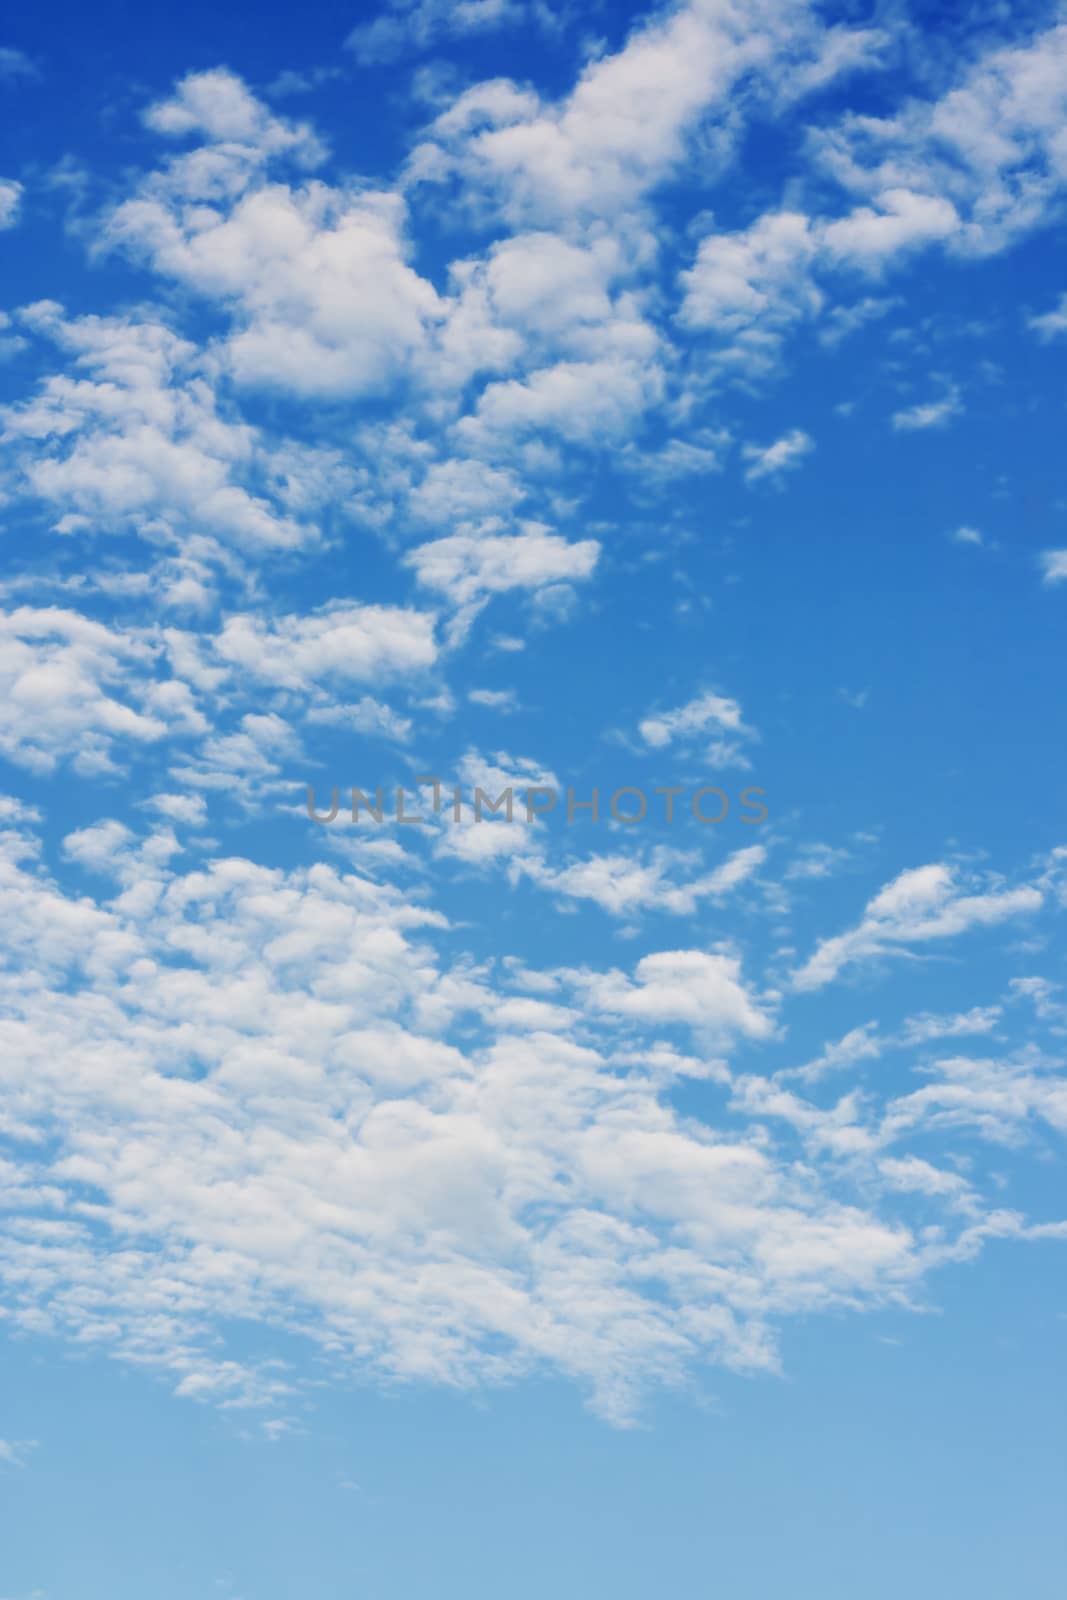 Bright sunny day with clouds. Cloudscape on blue sky. Soft focus.